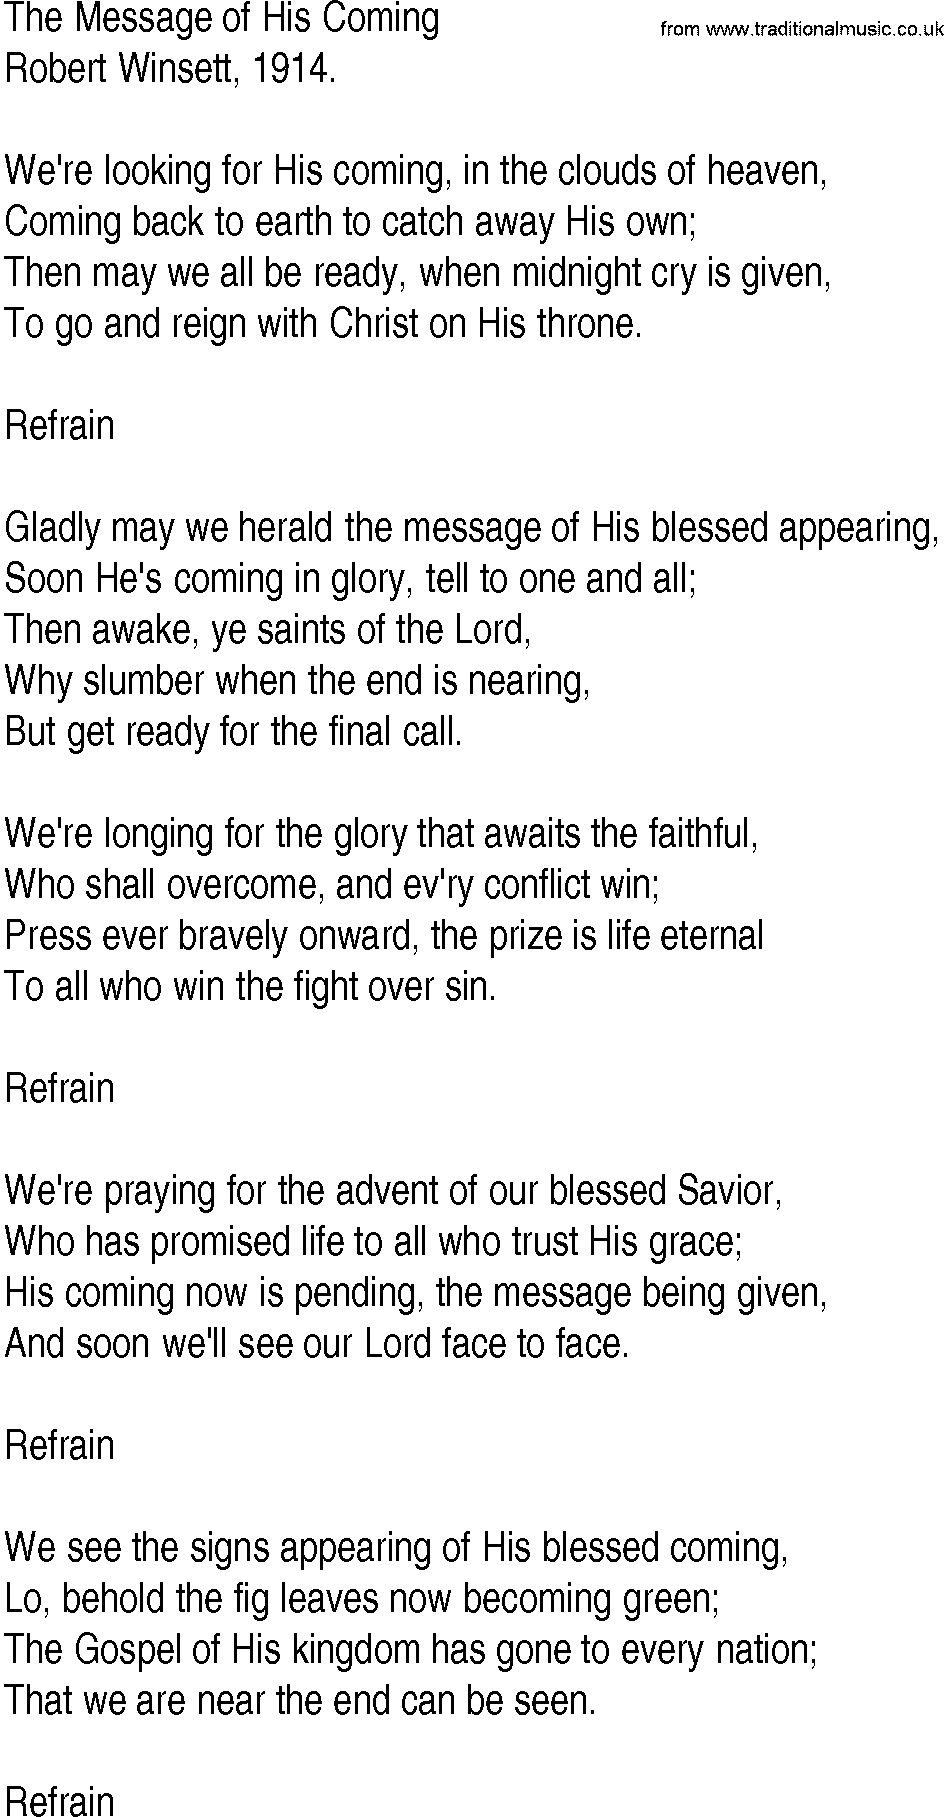 Hymn and Gospel Song: The Message of His Coming by Robert Winsett lyrics